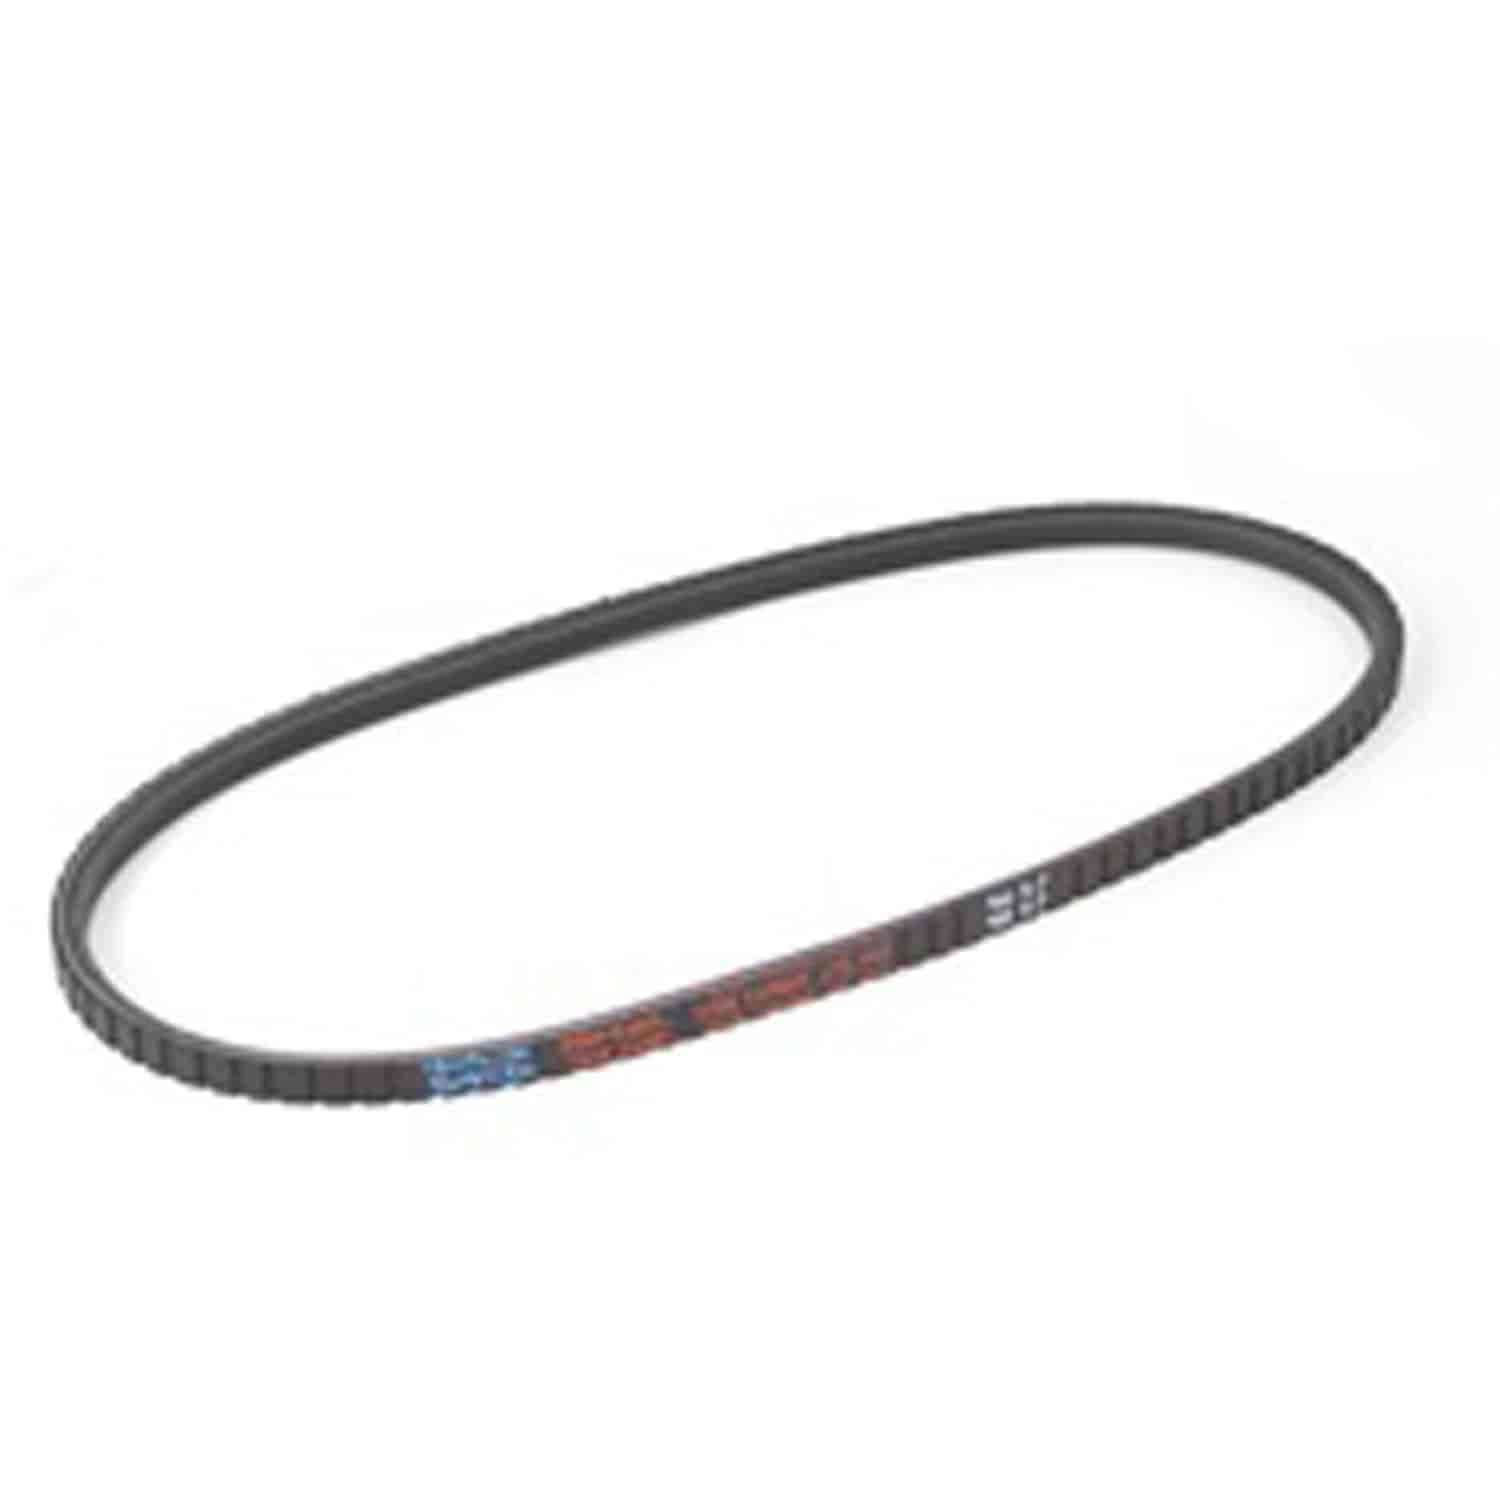 This power steering V-belt from Omix-ADA fits the 2.1L diesel engine in 85-94 Jeep Cherokees and the